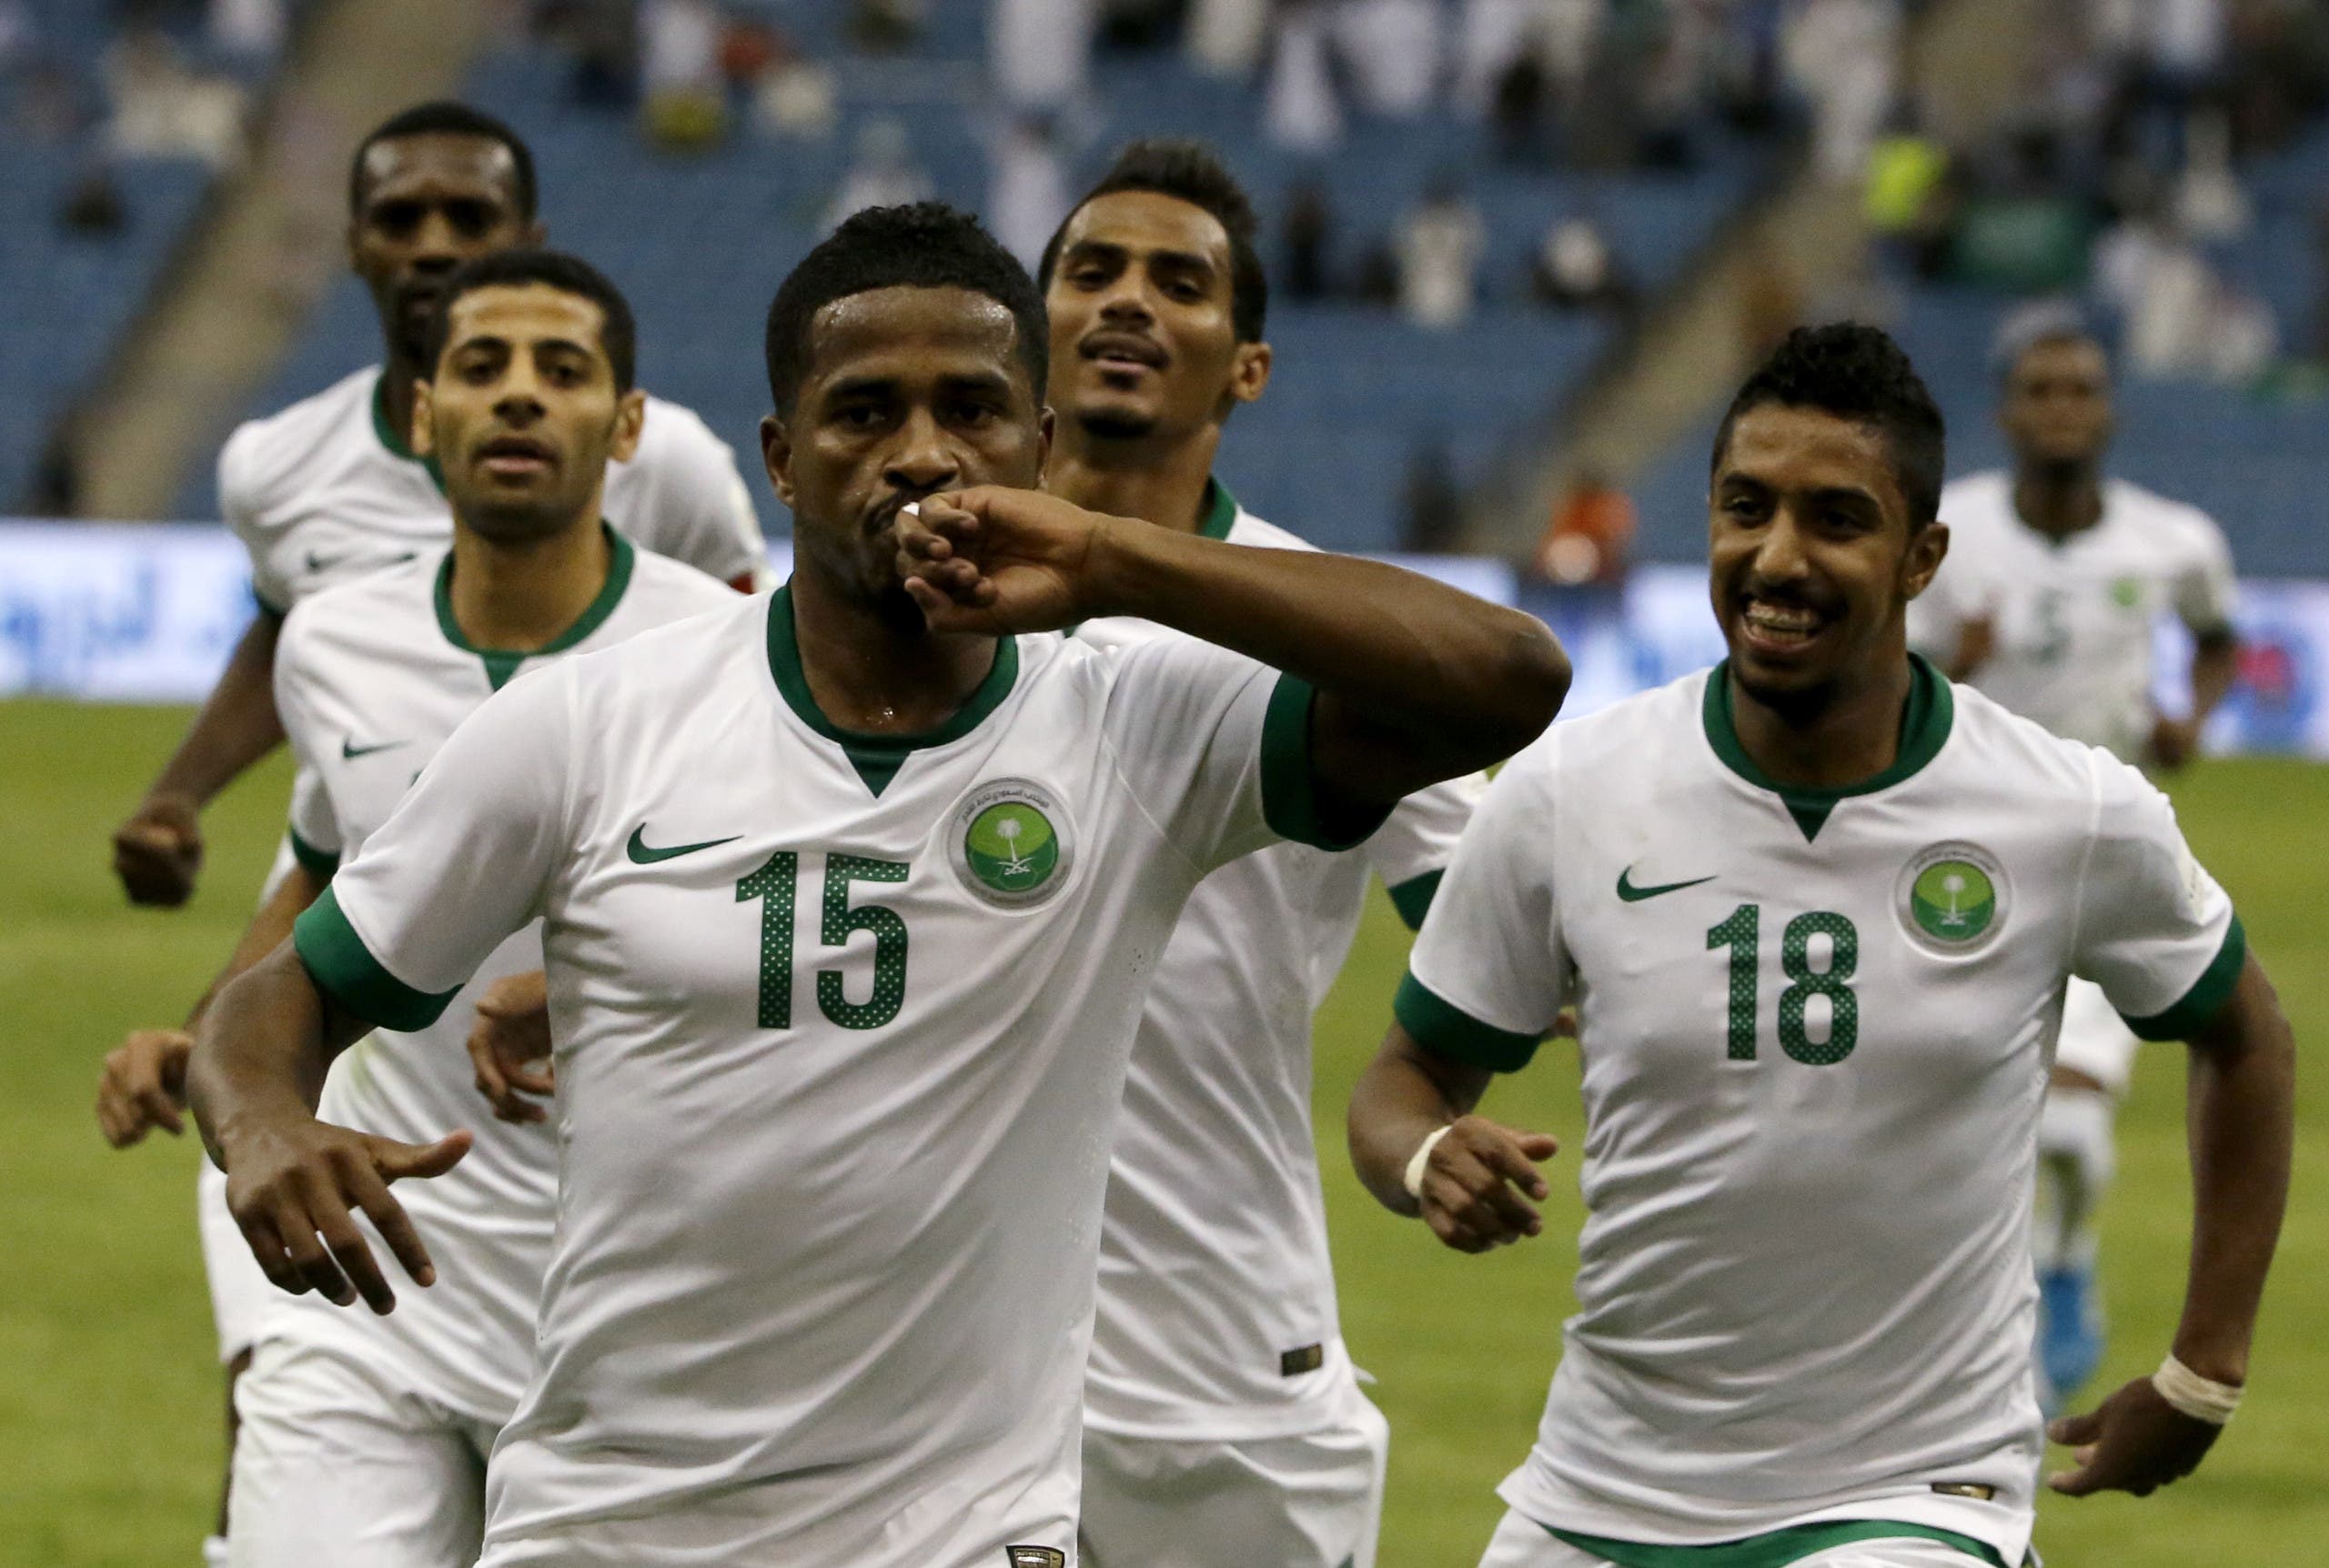 Saudi player Nasser al-Shamrani (C) celebrates with teammates after scoring a goal against Bahrain during their Gulf Cup Group A football match at the King Fahad International Stadium in Riyadh on November 16, 2014. AFP 